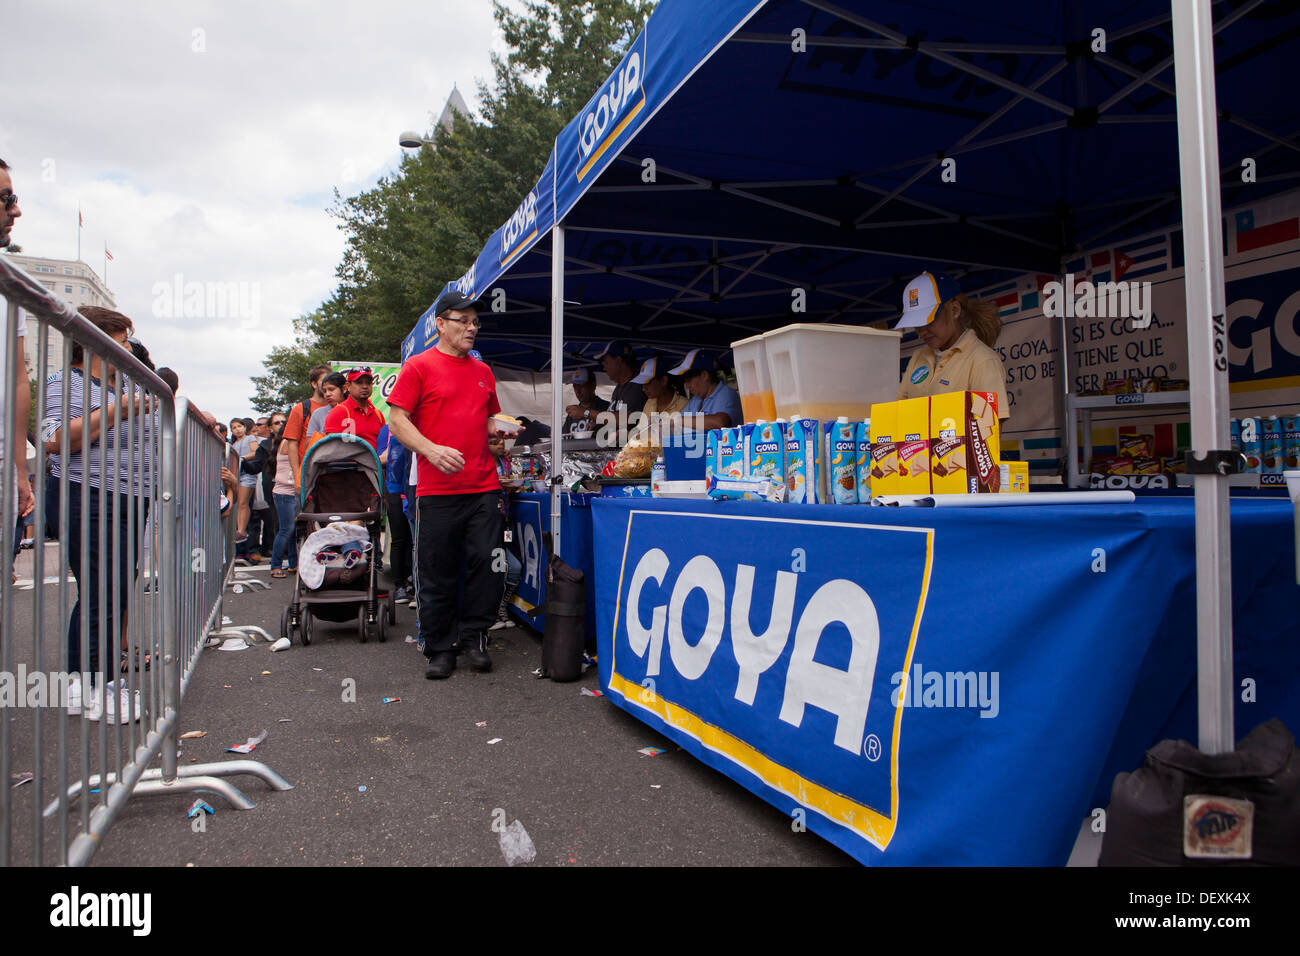 Goya refreshments stand at outdoor festival Stock Photo